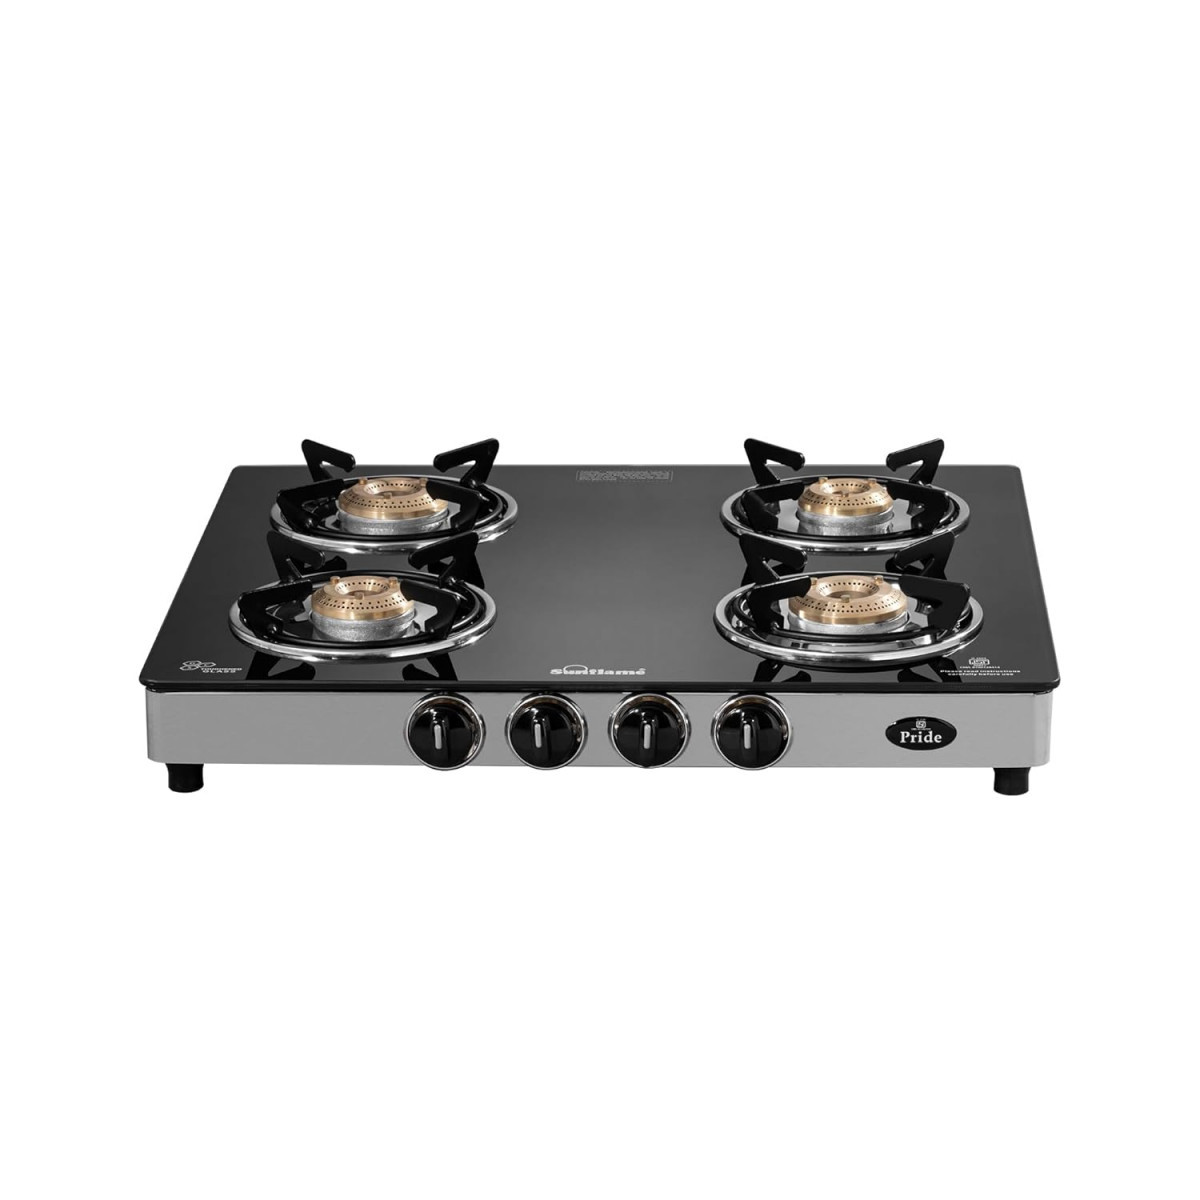 SUNFLAME Pride 4 Burner Open Gas Stove 2 Small And 2 Medium Brass Burners 2-Years Product Coverage Ergonomic Knobs Easy To Maintain L Toughened Glass Top Pan India Presence